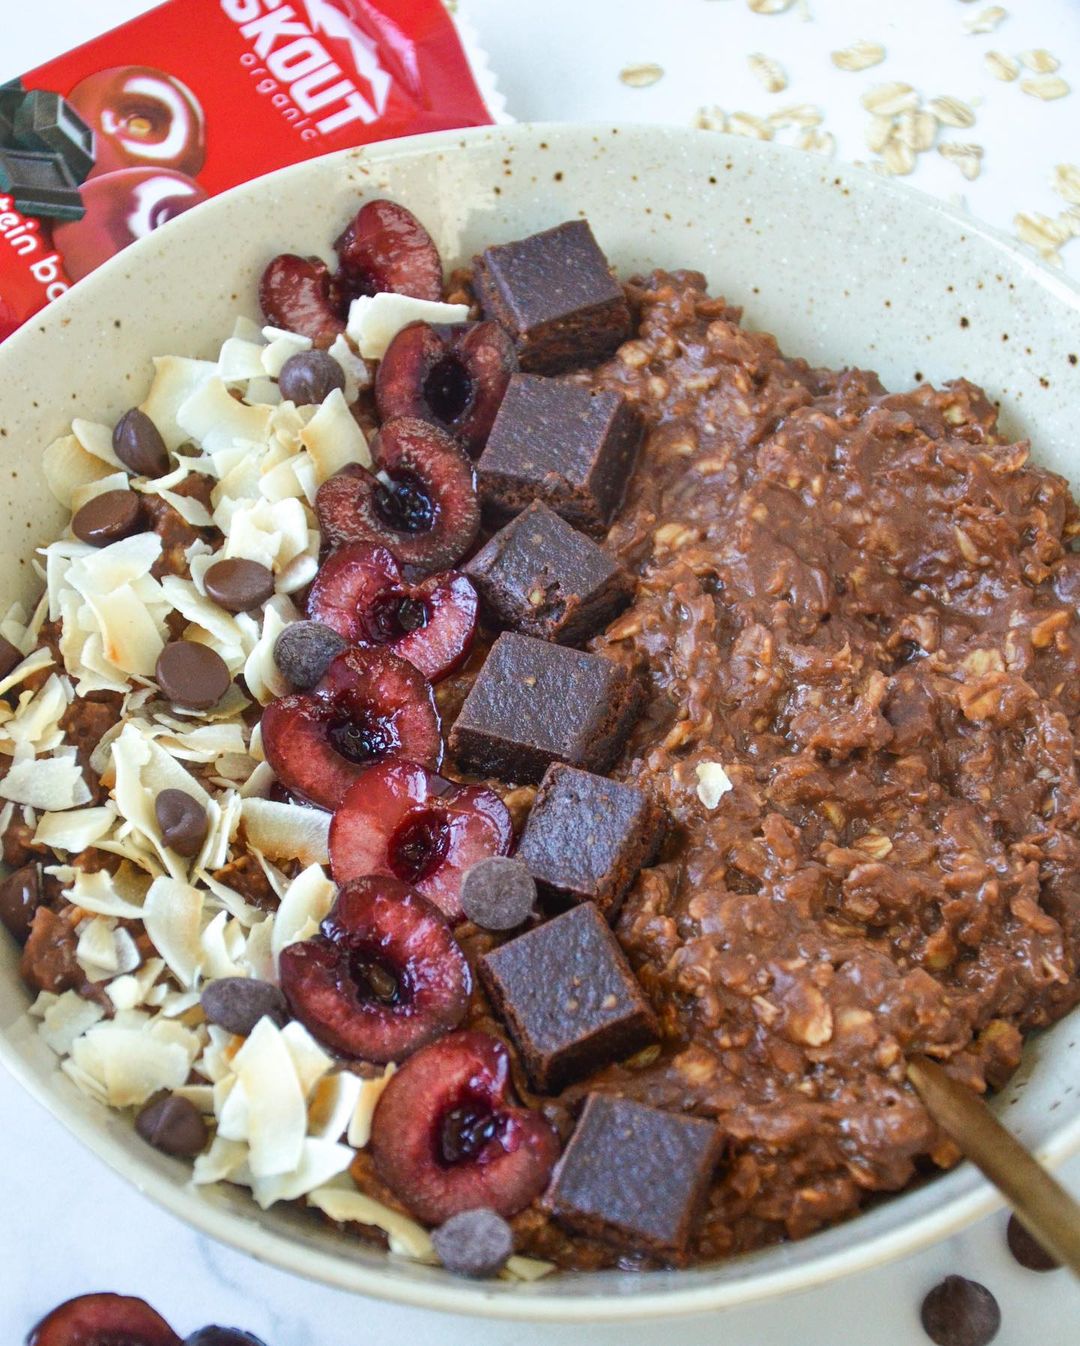 Chocolate Protein Oats